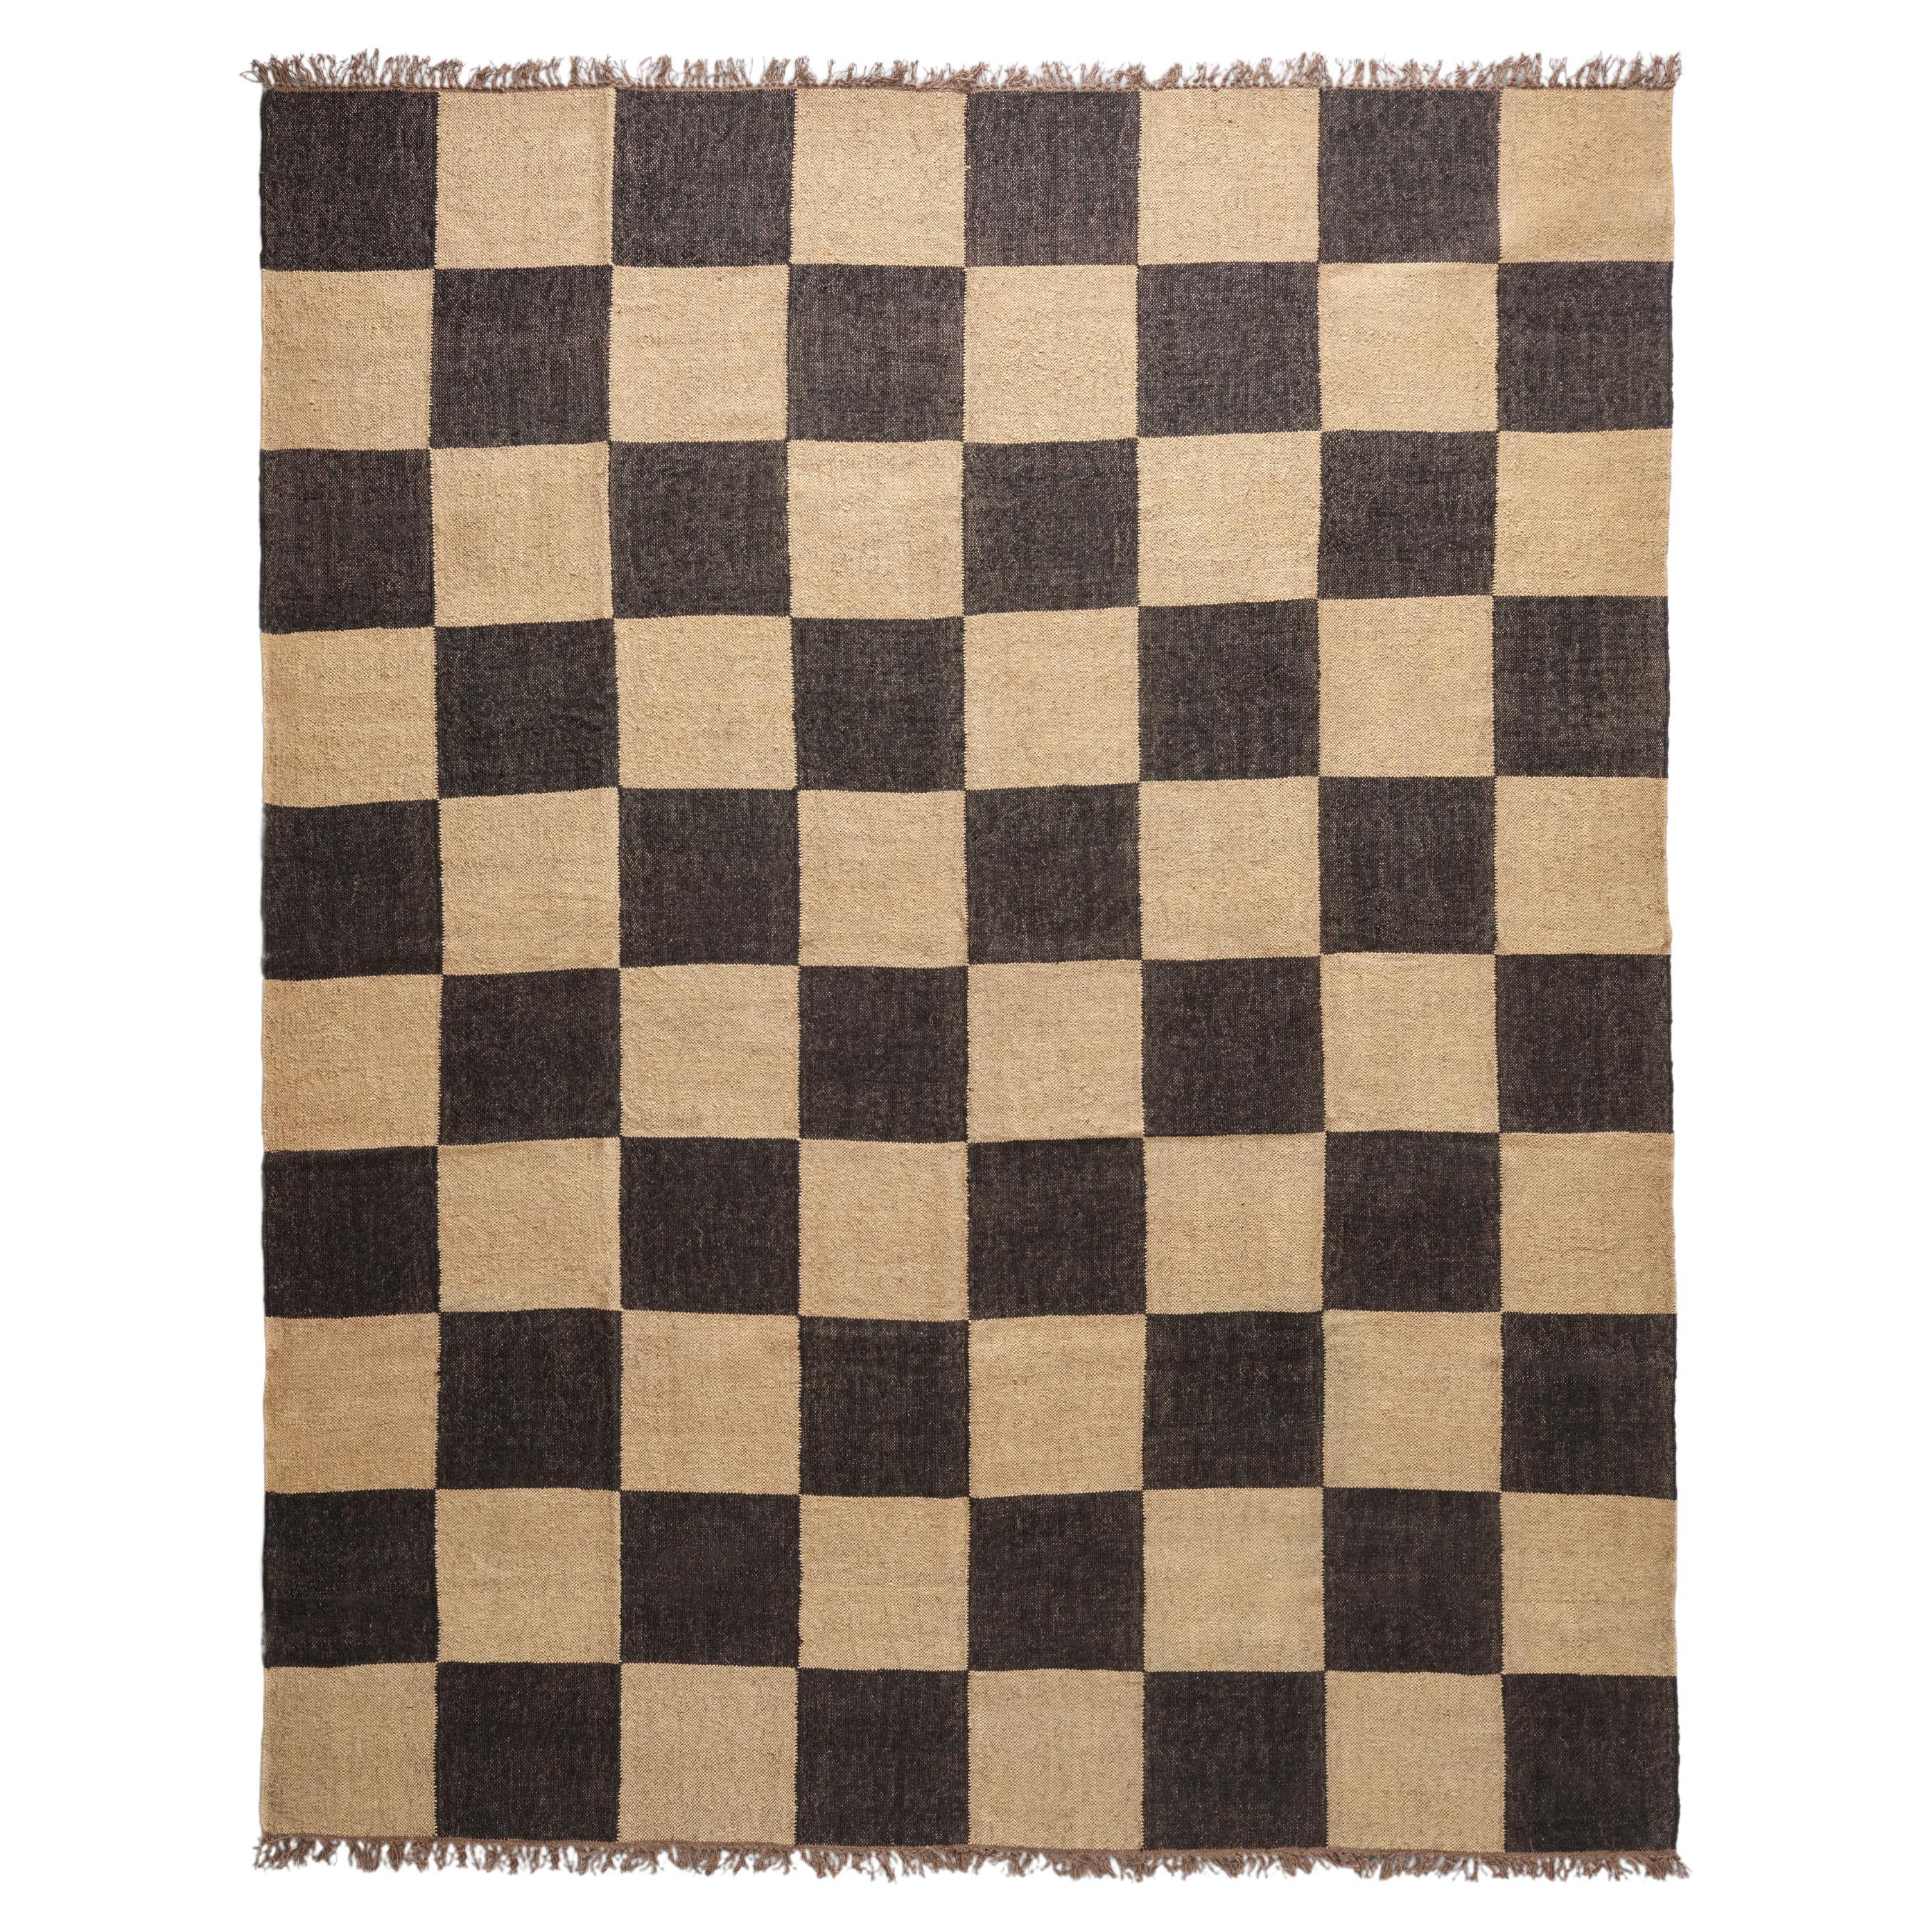 The Forsyth Checkerboard Rug - Big Checks in Off Black, 8x10 For Sale